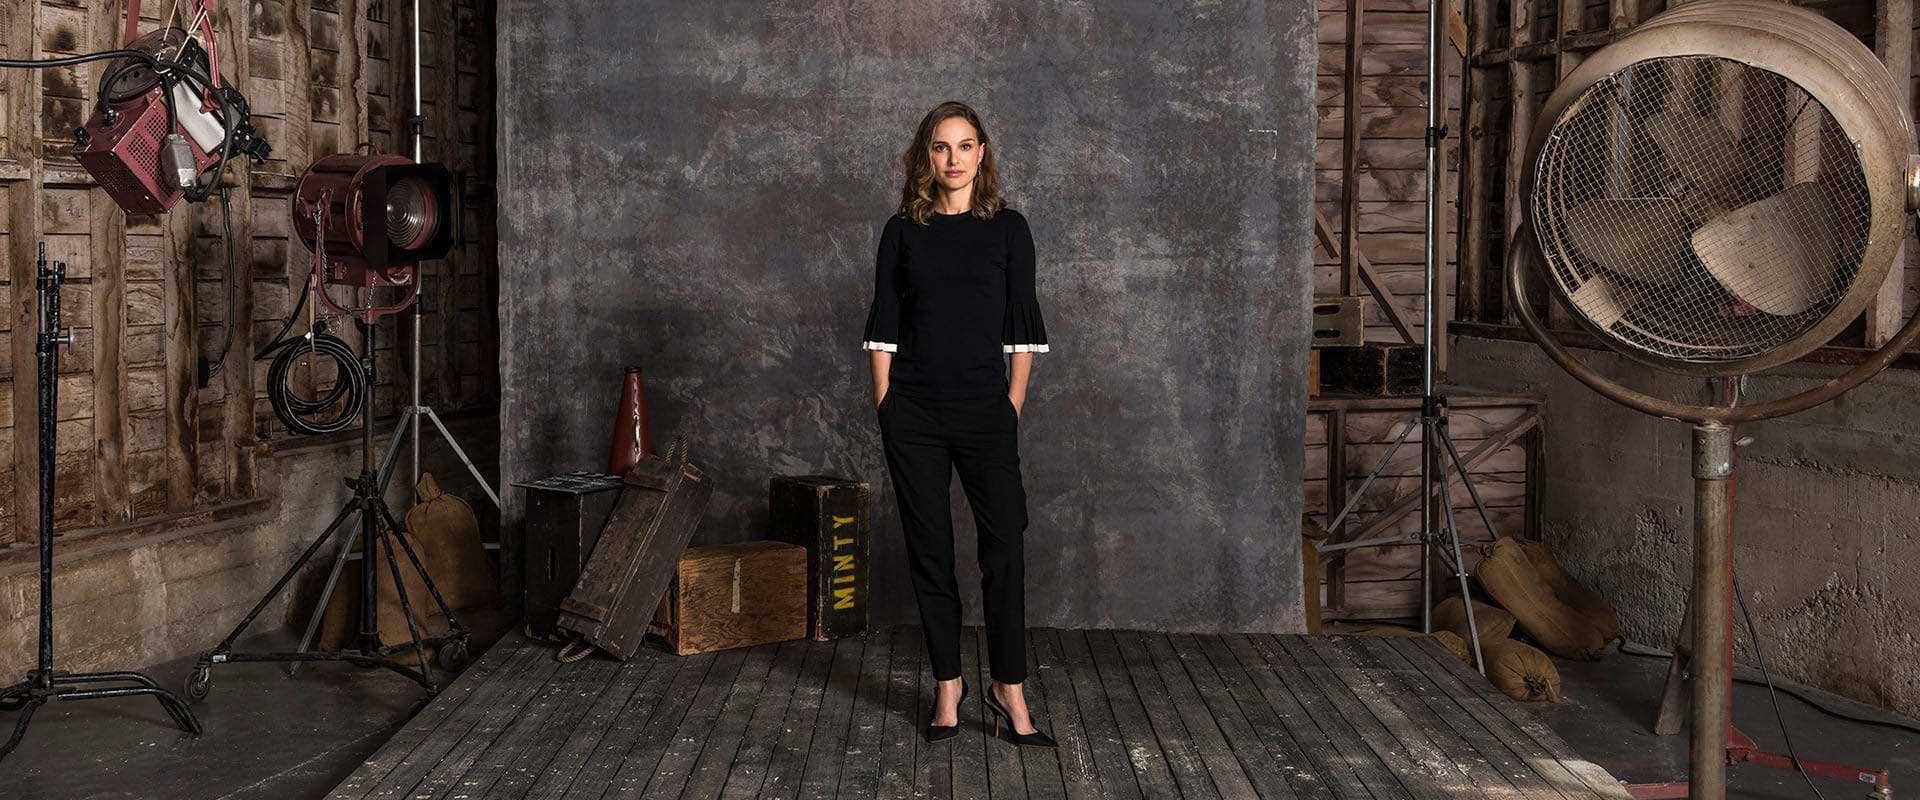 Masterclass video shoot with Natalie Portman on Sound Stage in Los Angeles